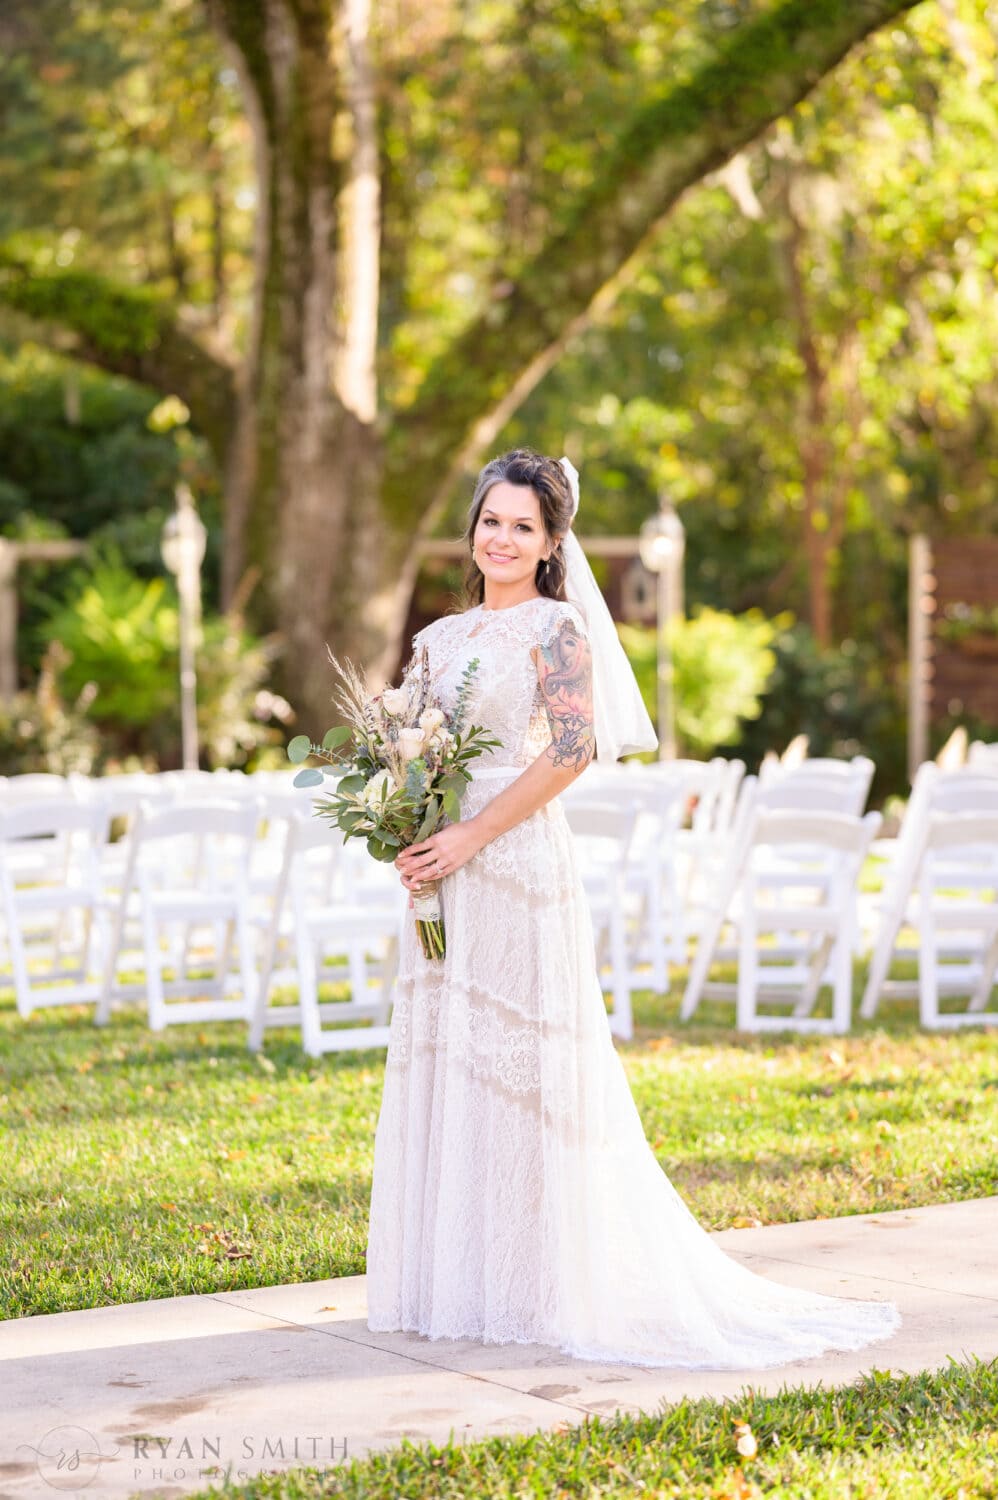 Bridal portraits in front of the ceremony area - The Cooper House